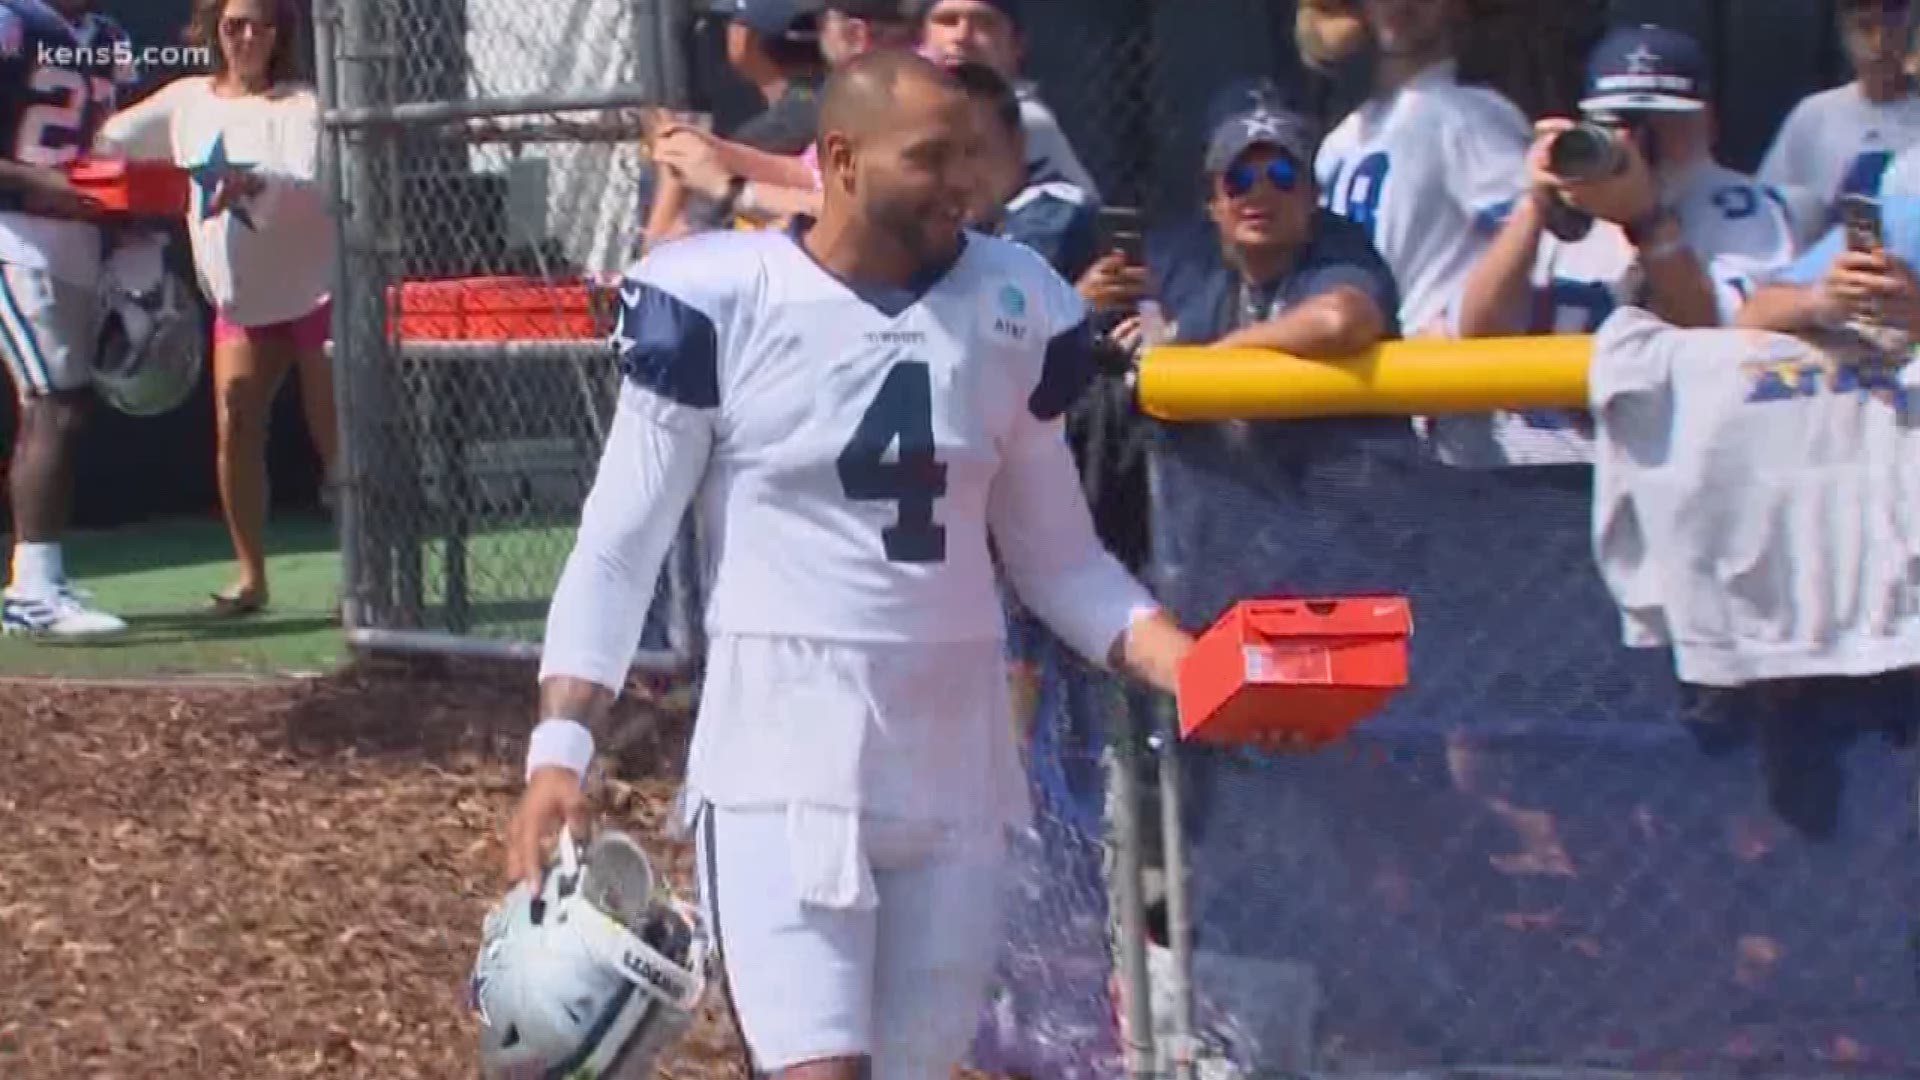 Day 4 of the Dallas Cowboys 2019 Training Camp is in the books and it started with a generous gesture.